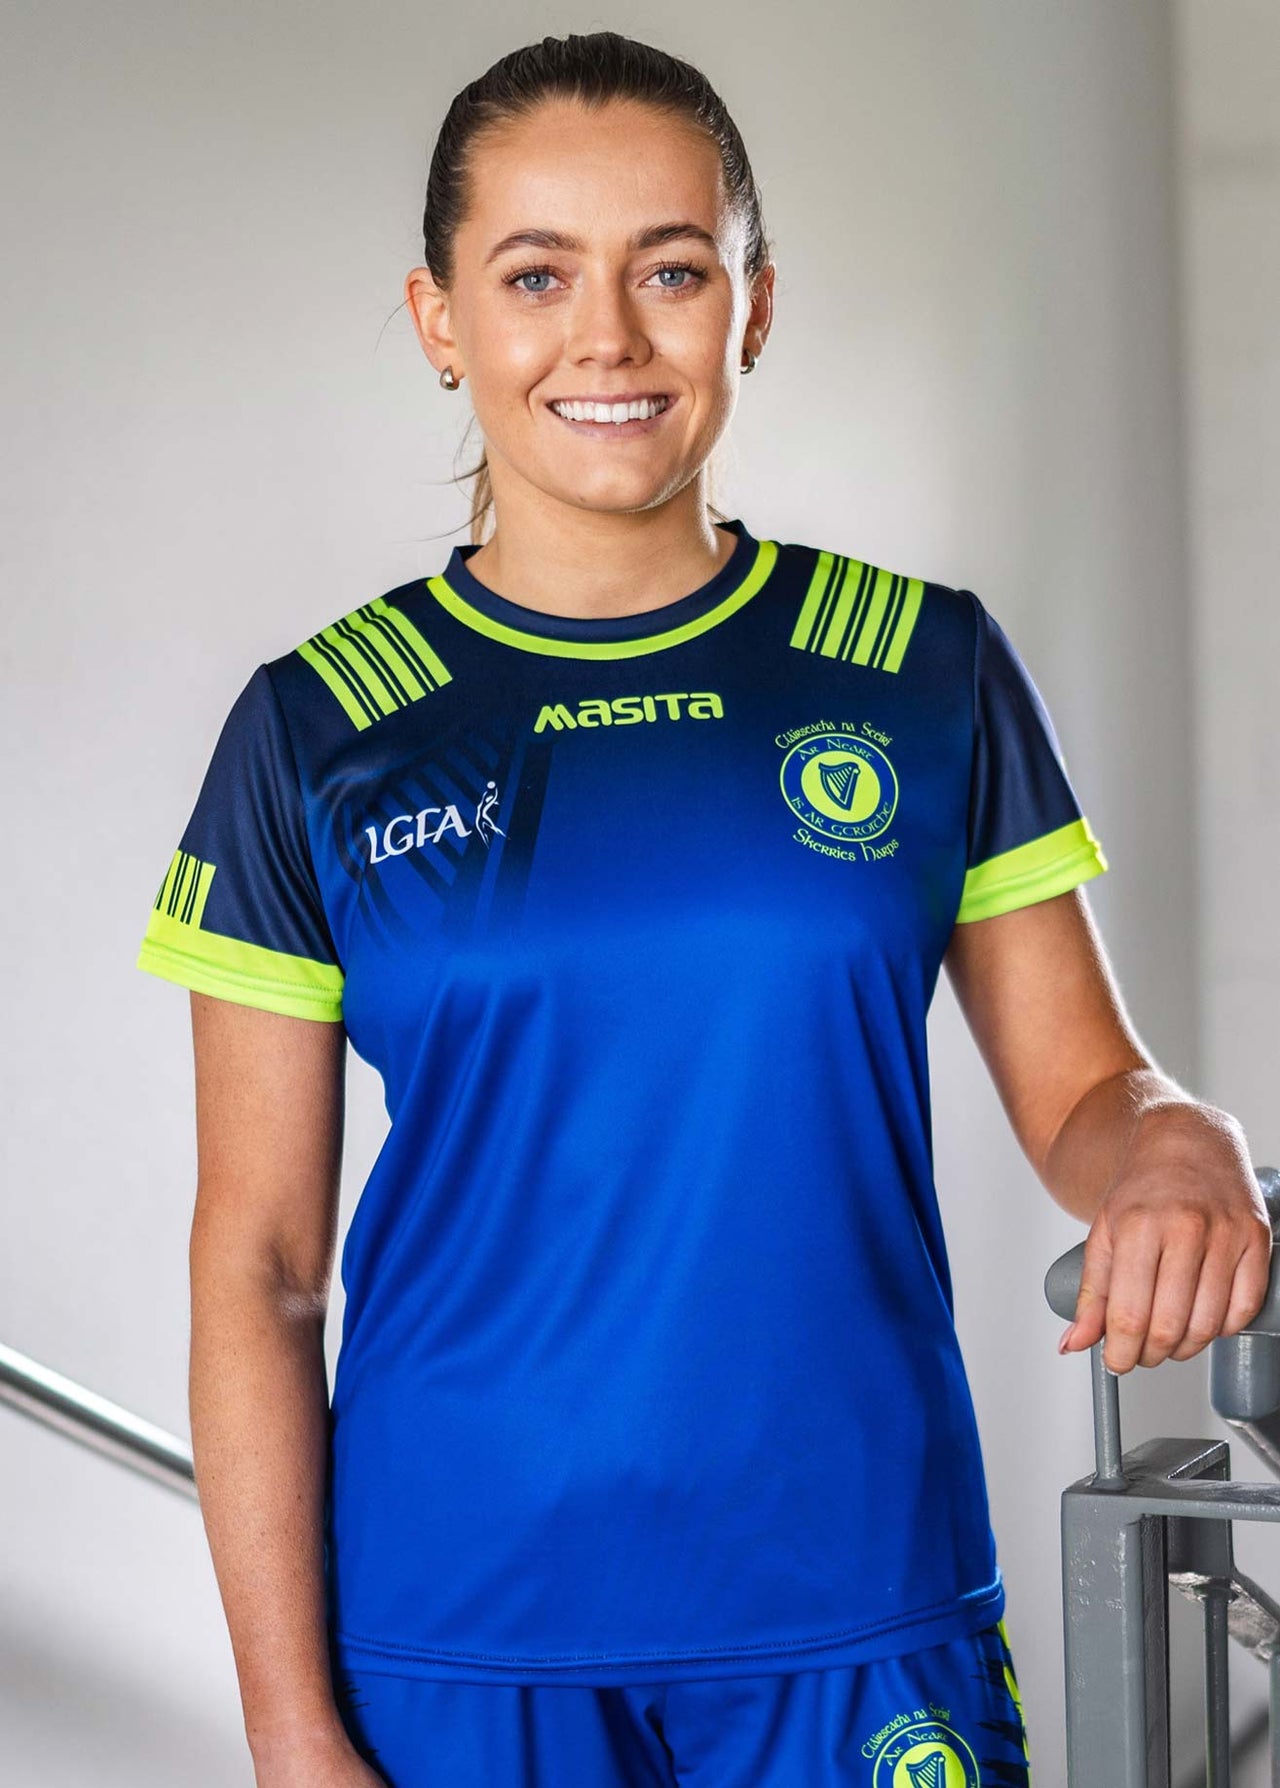 Skerries Harps LGFA Neon Training Jersey Player Fit Adult